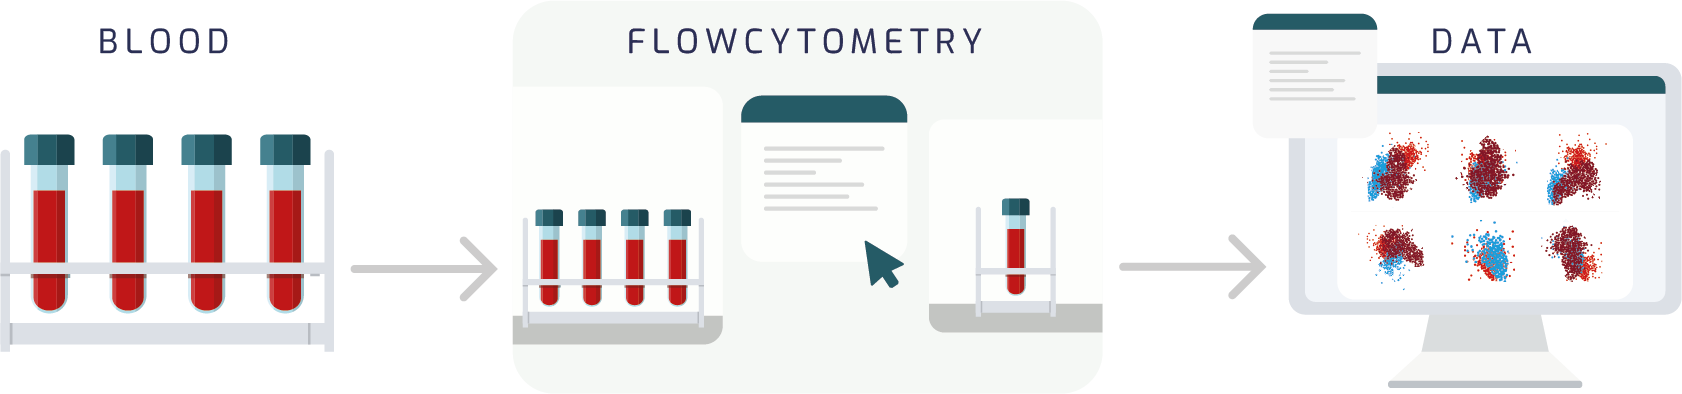 test tubes of blood samples being evaluated using flow cytometry to analyze its data